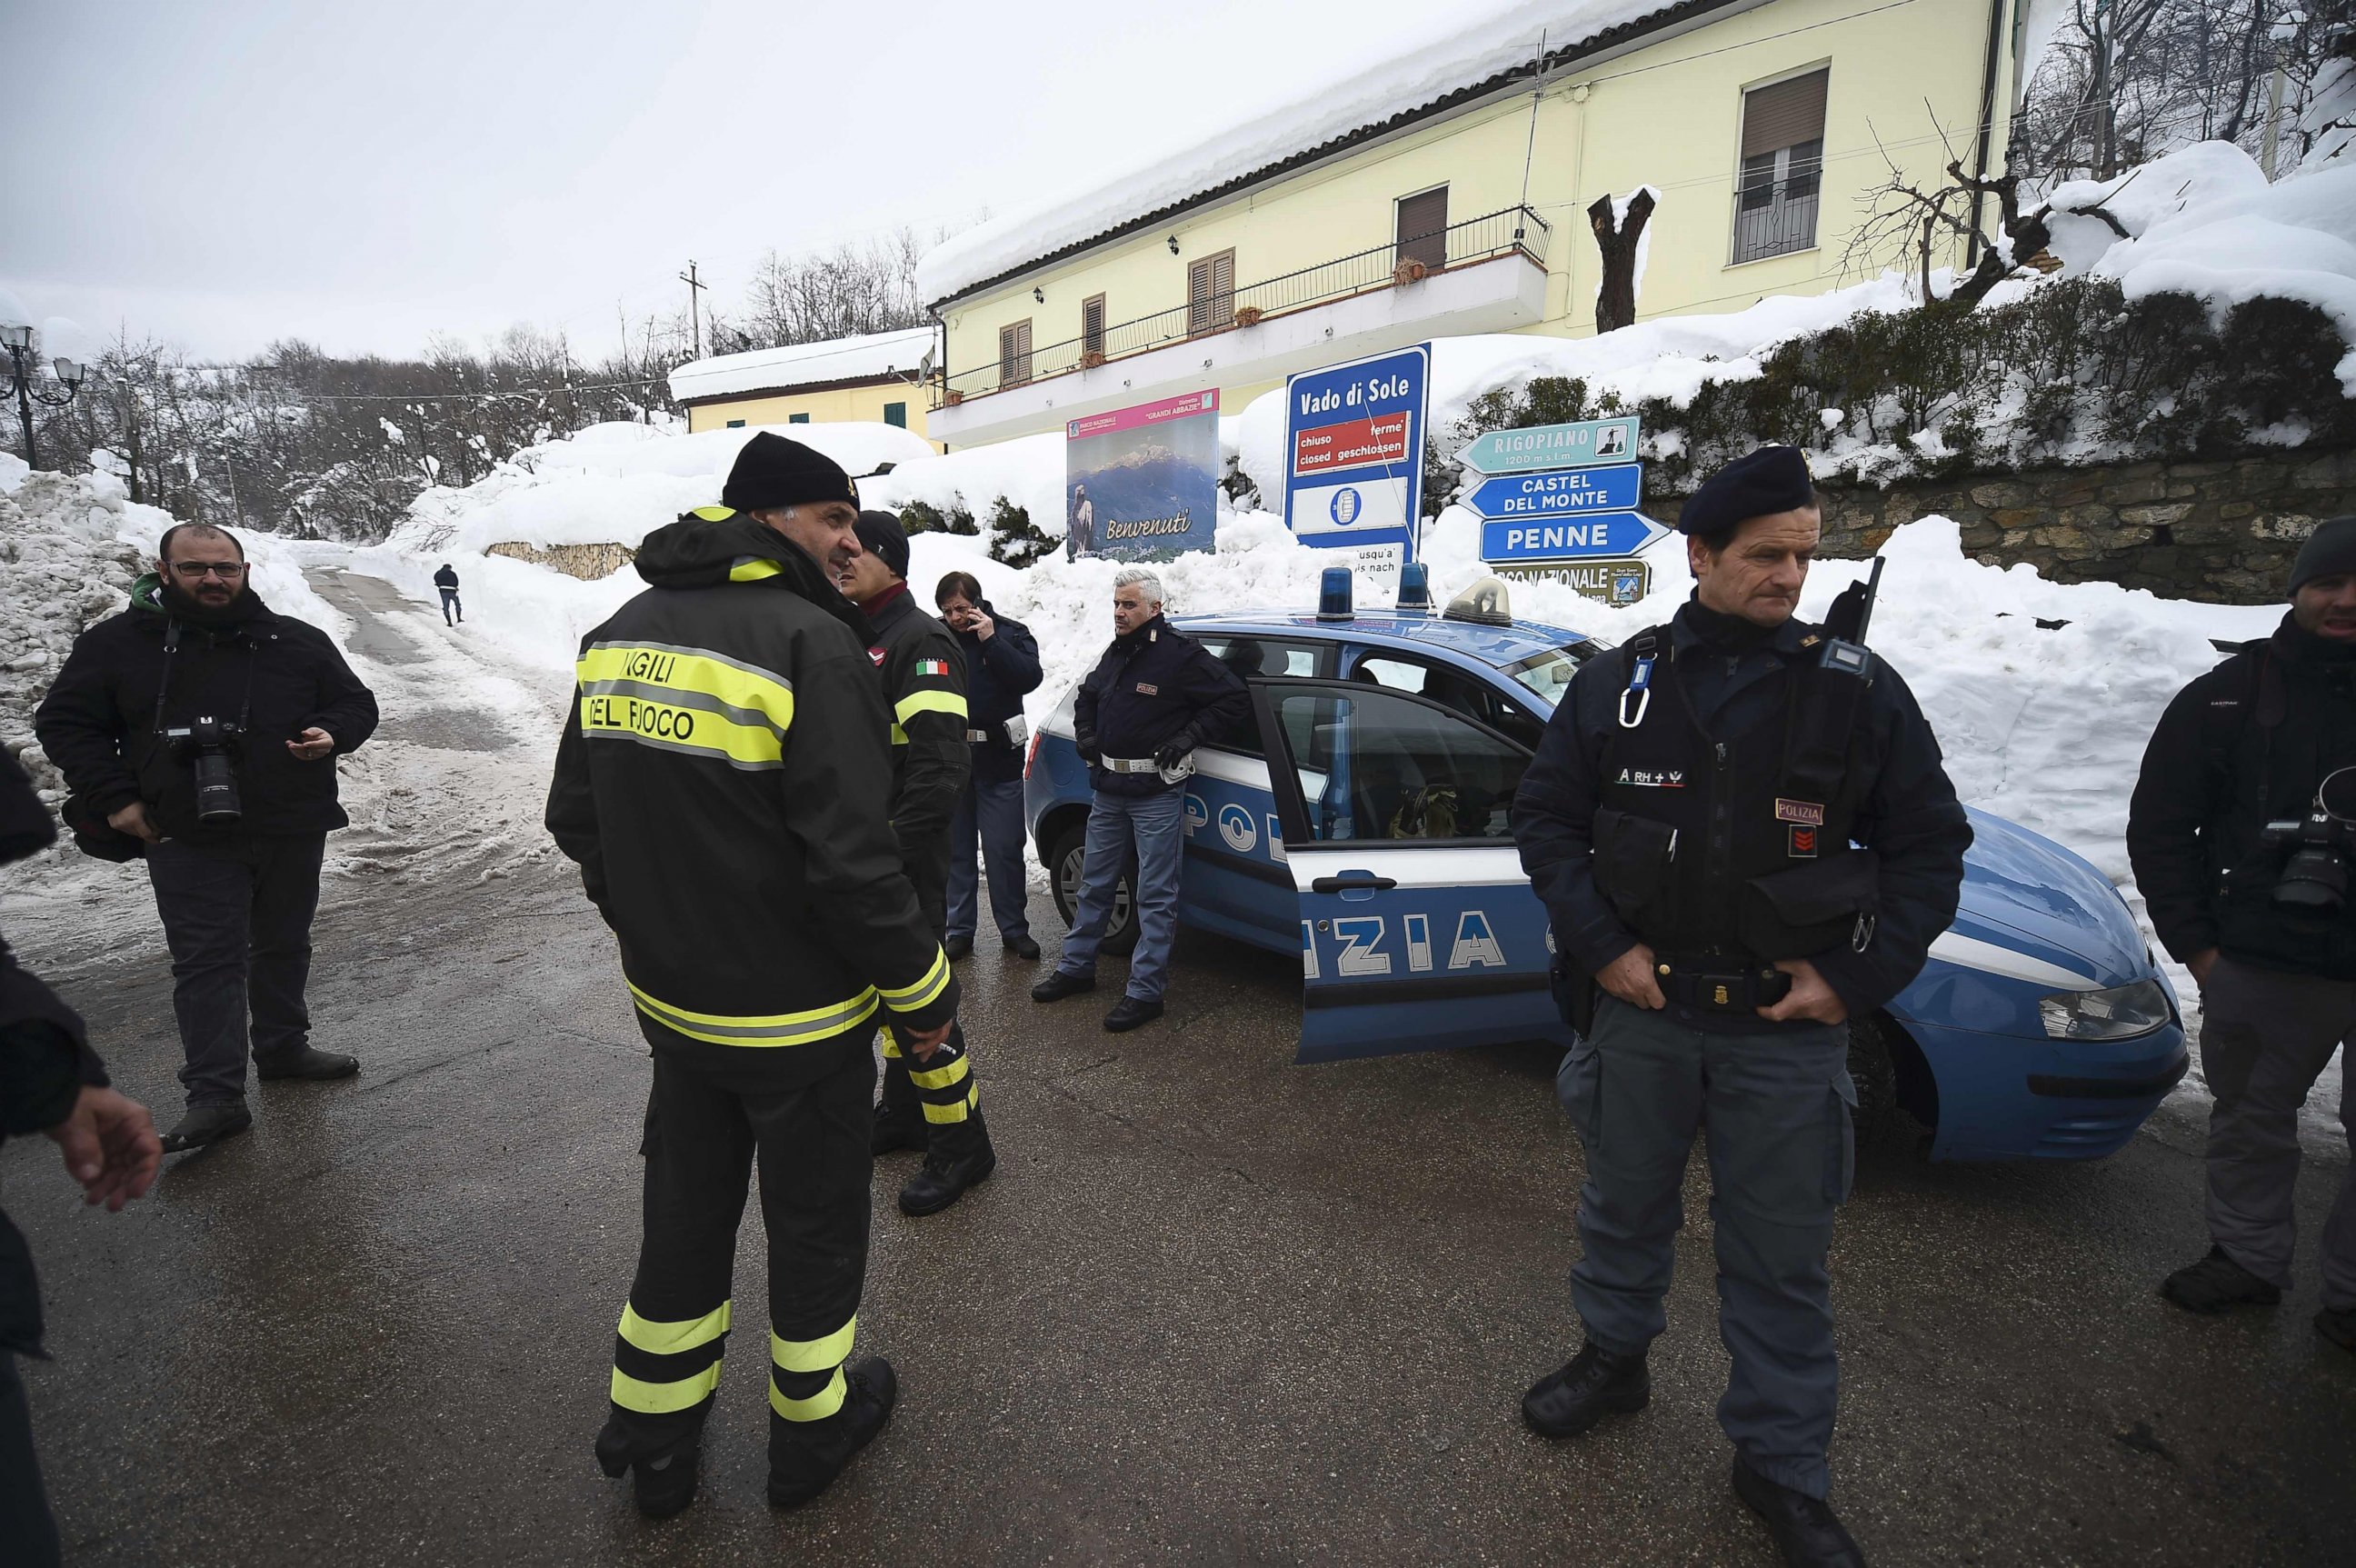 PHOTO: Italian rescuers gather in the town of Farindola, Italy as they make their way to the site of an avalanche that engulfed the Hotel Rigopiano, Jan. 20, 2017.